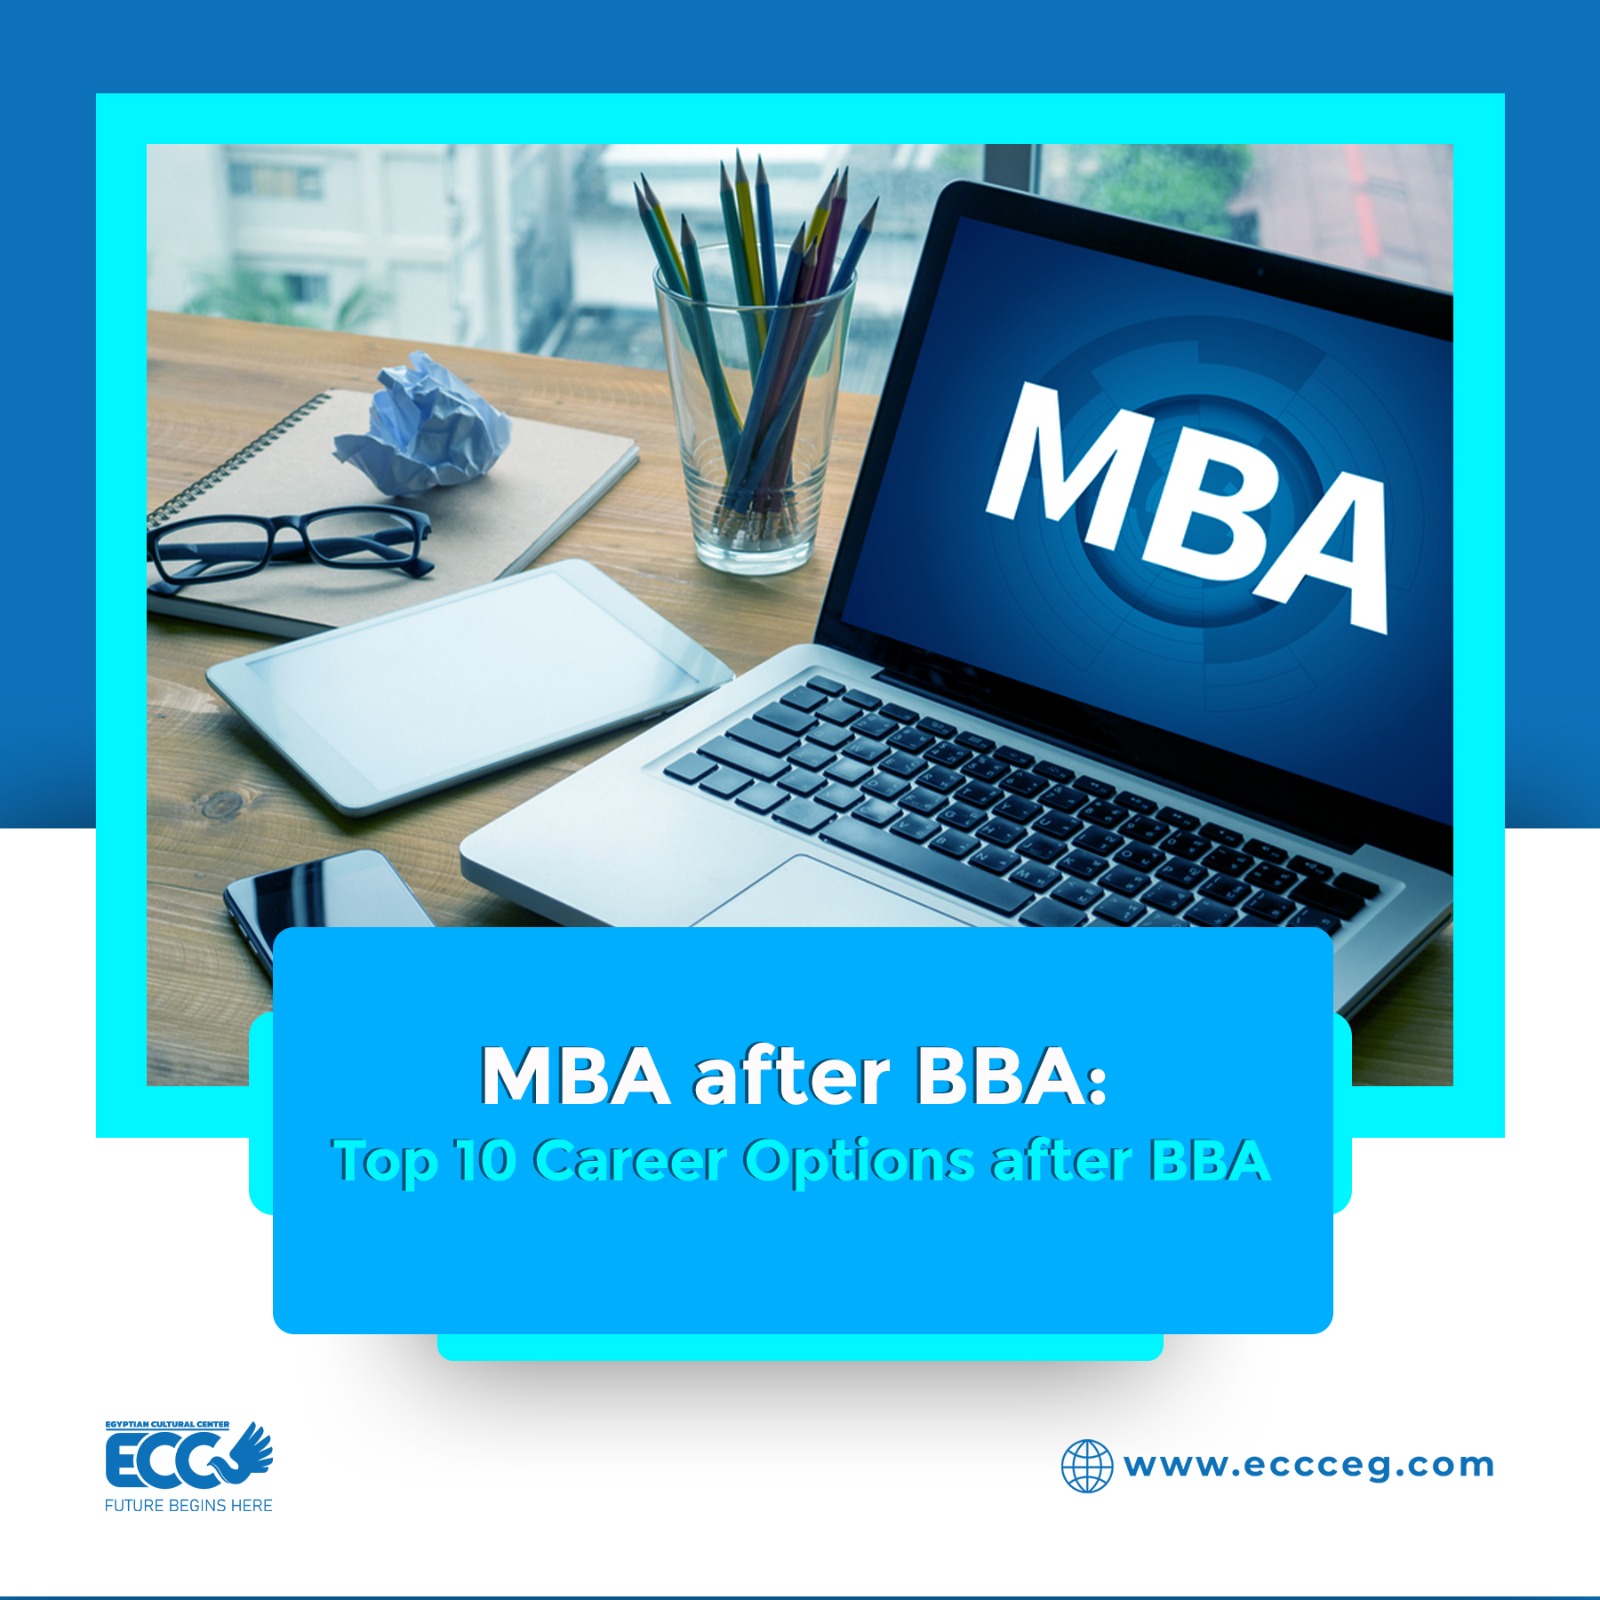 MBA after BBA: Top 10 Career Options after BBA